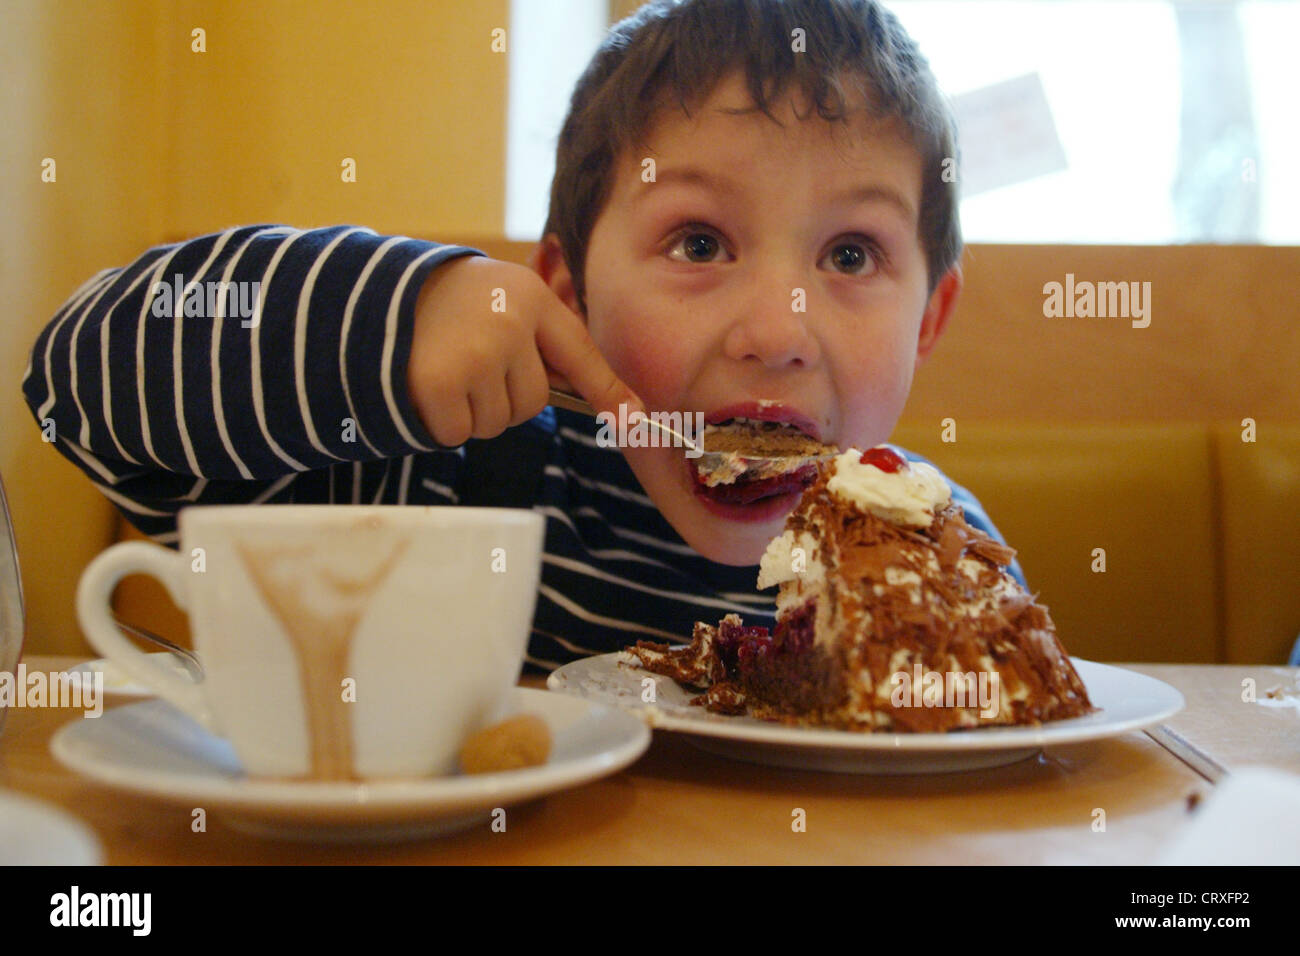 Boy Eating Cake stock image. Image of cute, white, young - 9247289